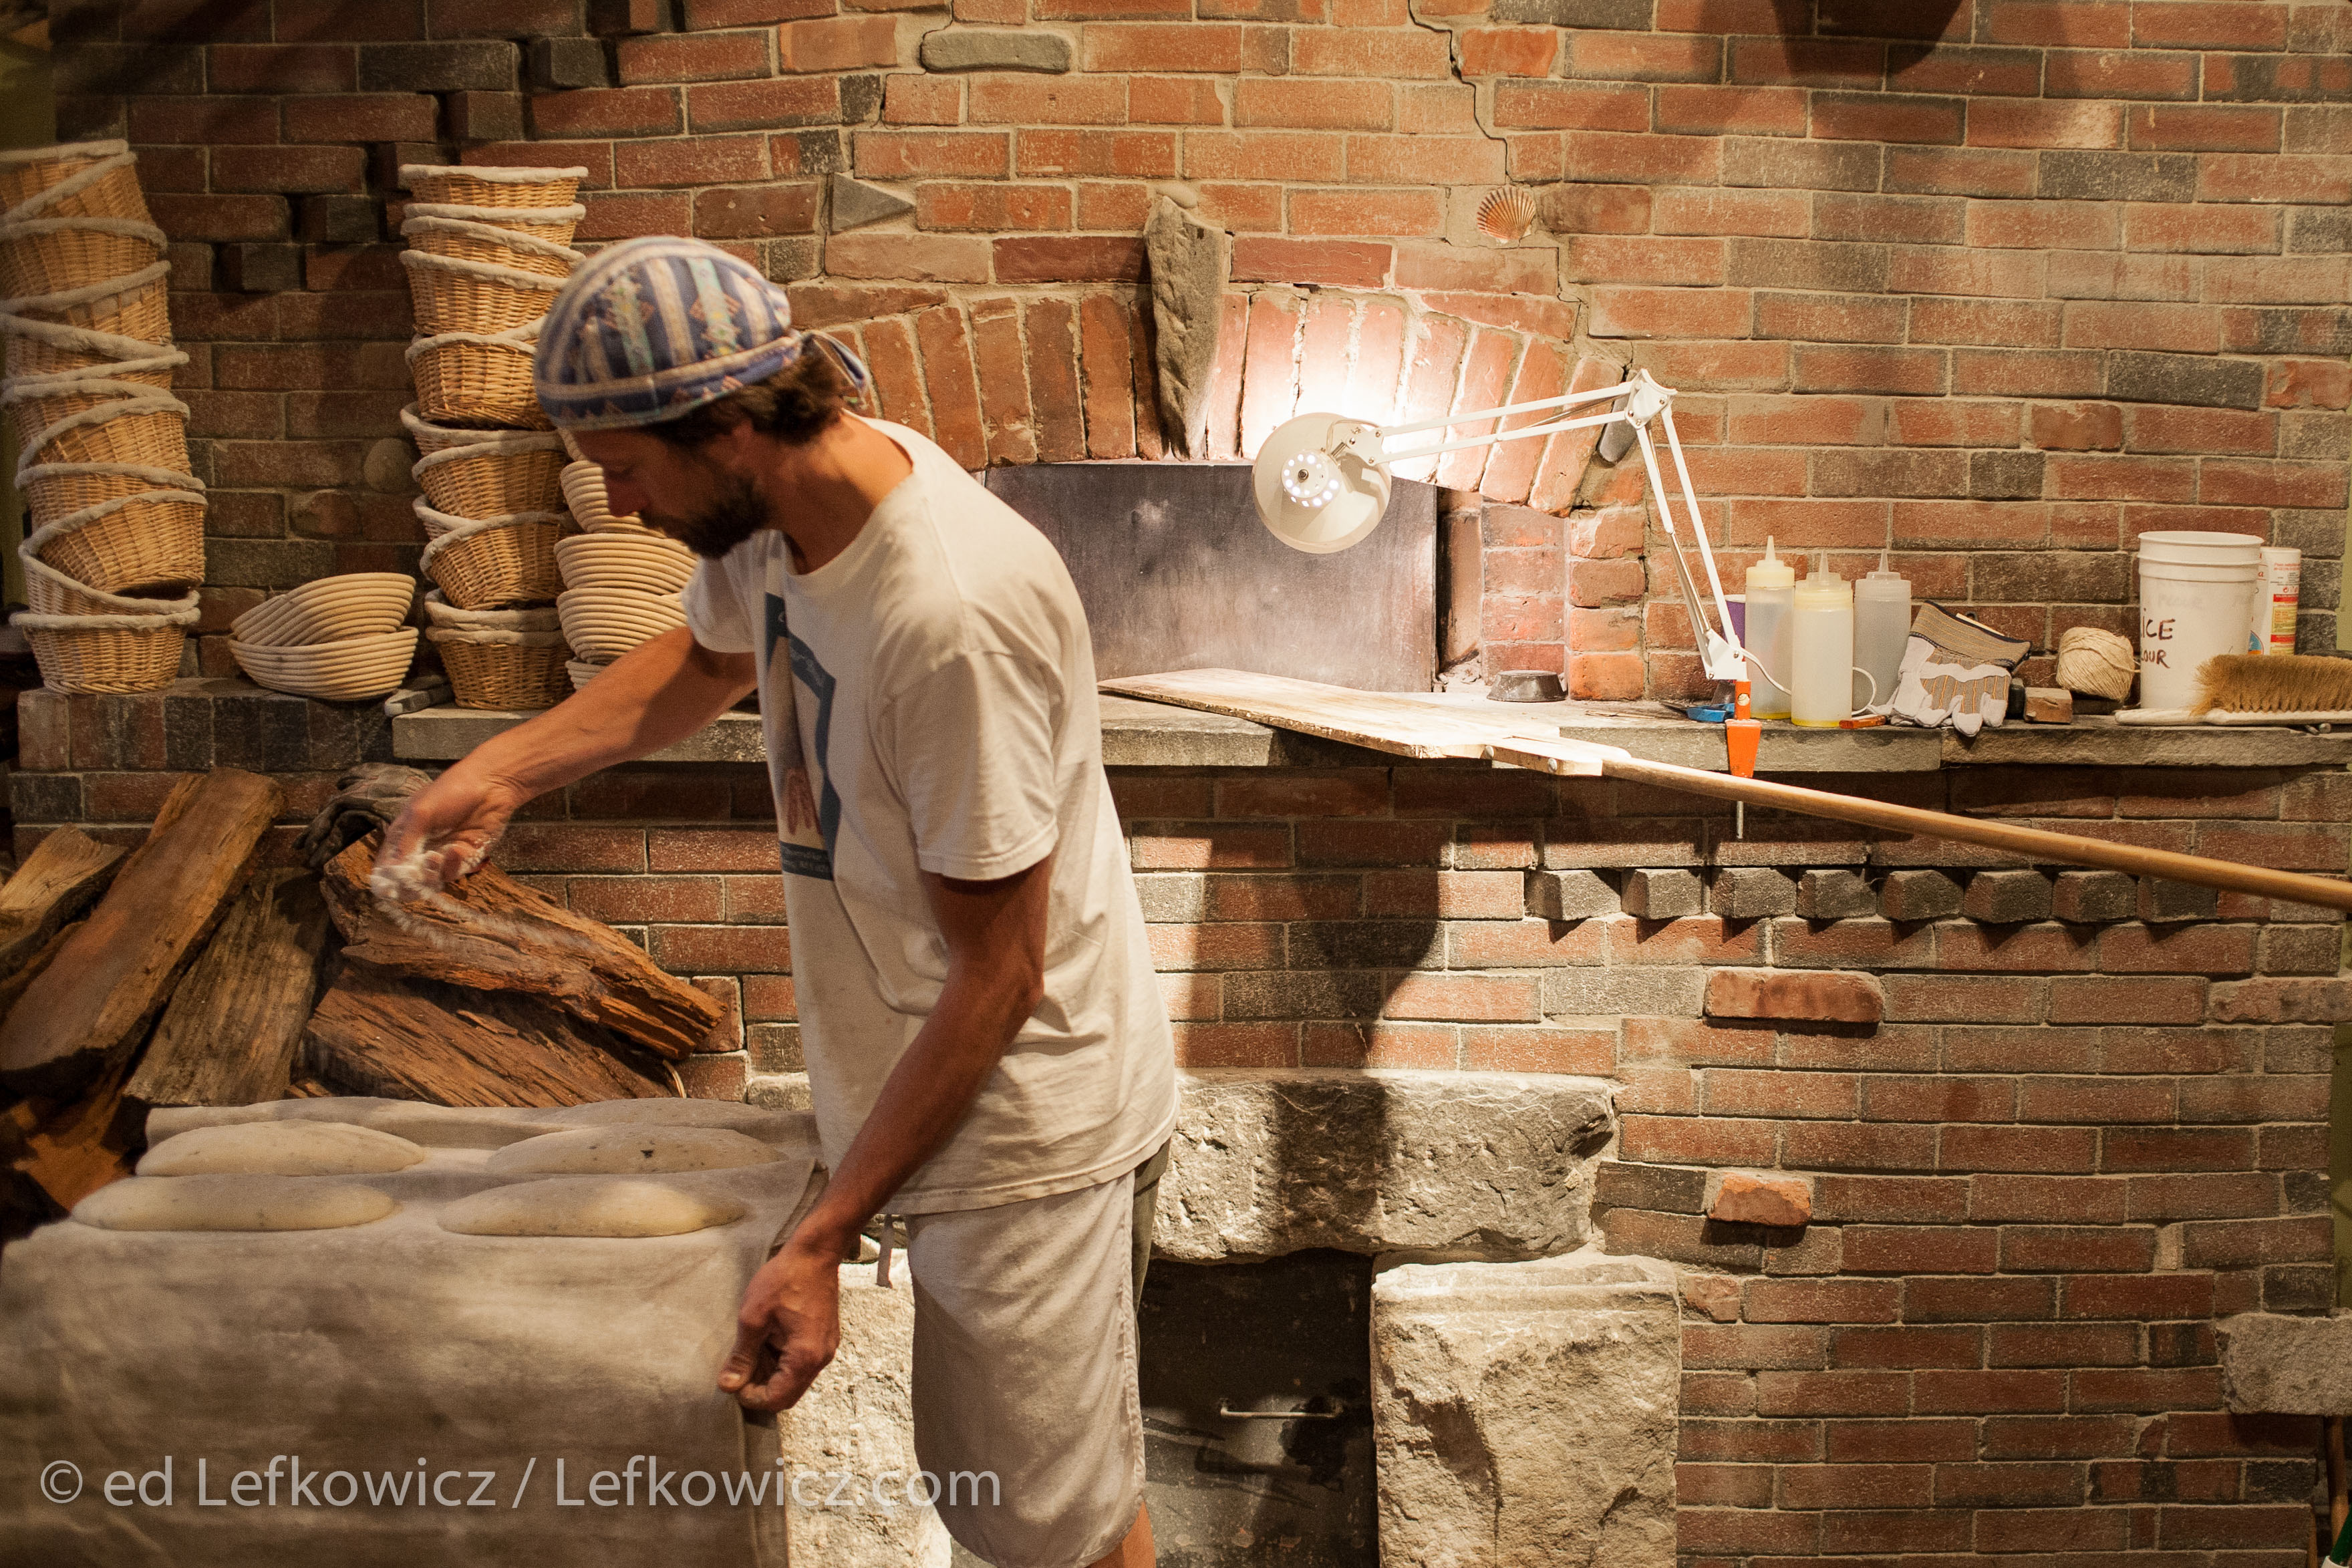 Andrea Colognese of The Village Hearth Bakery and Cafe, preparing loaves of bread for the oven. Colognese built the oven himself.